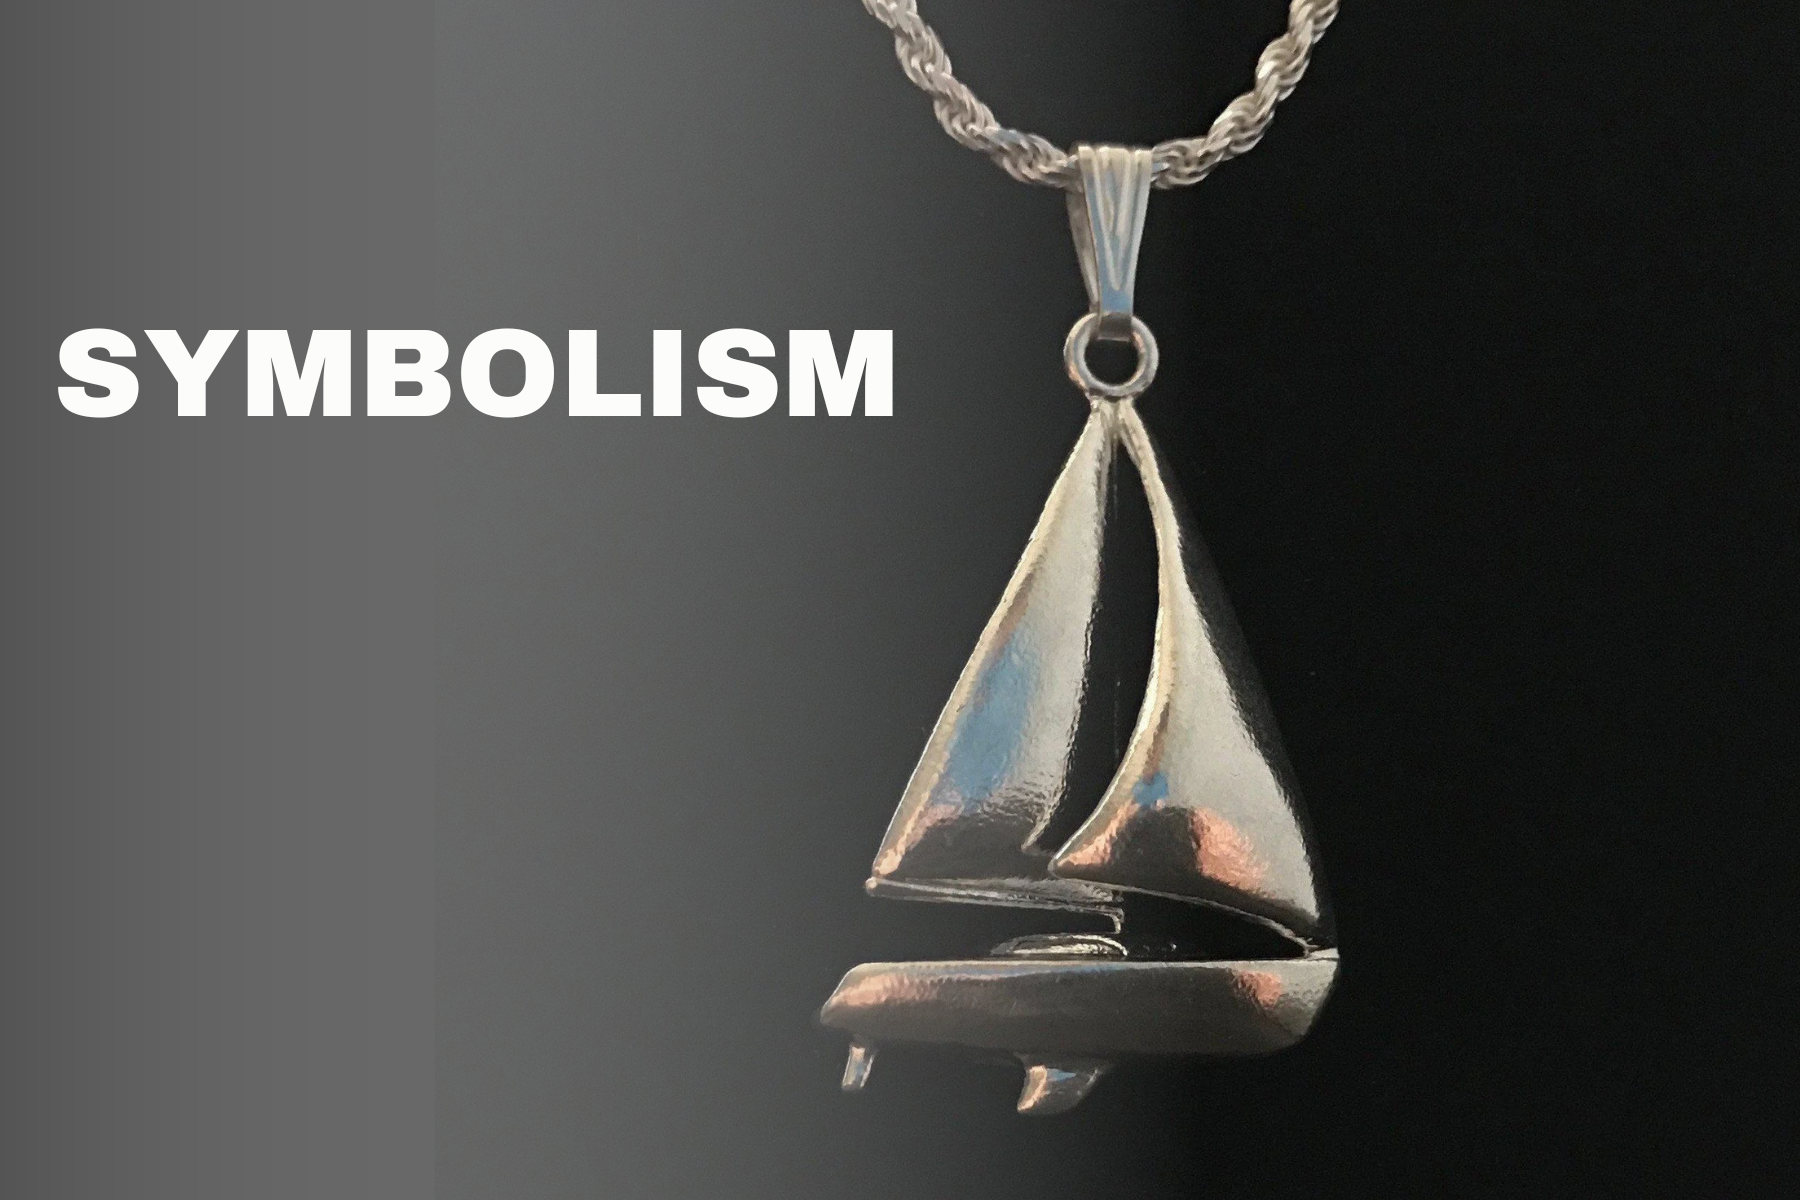 A pendant of a silver sailboat on a dark background with the word "symbolism" next to it